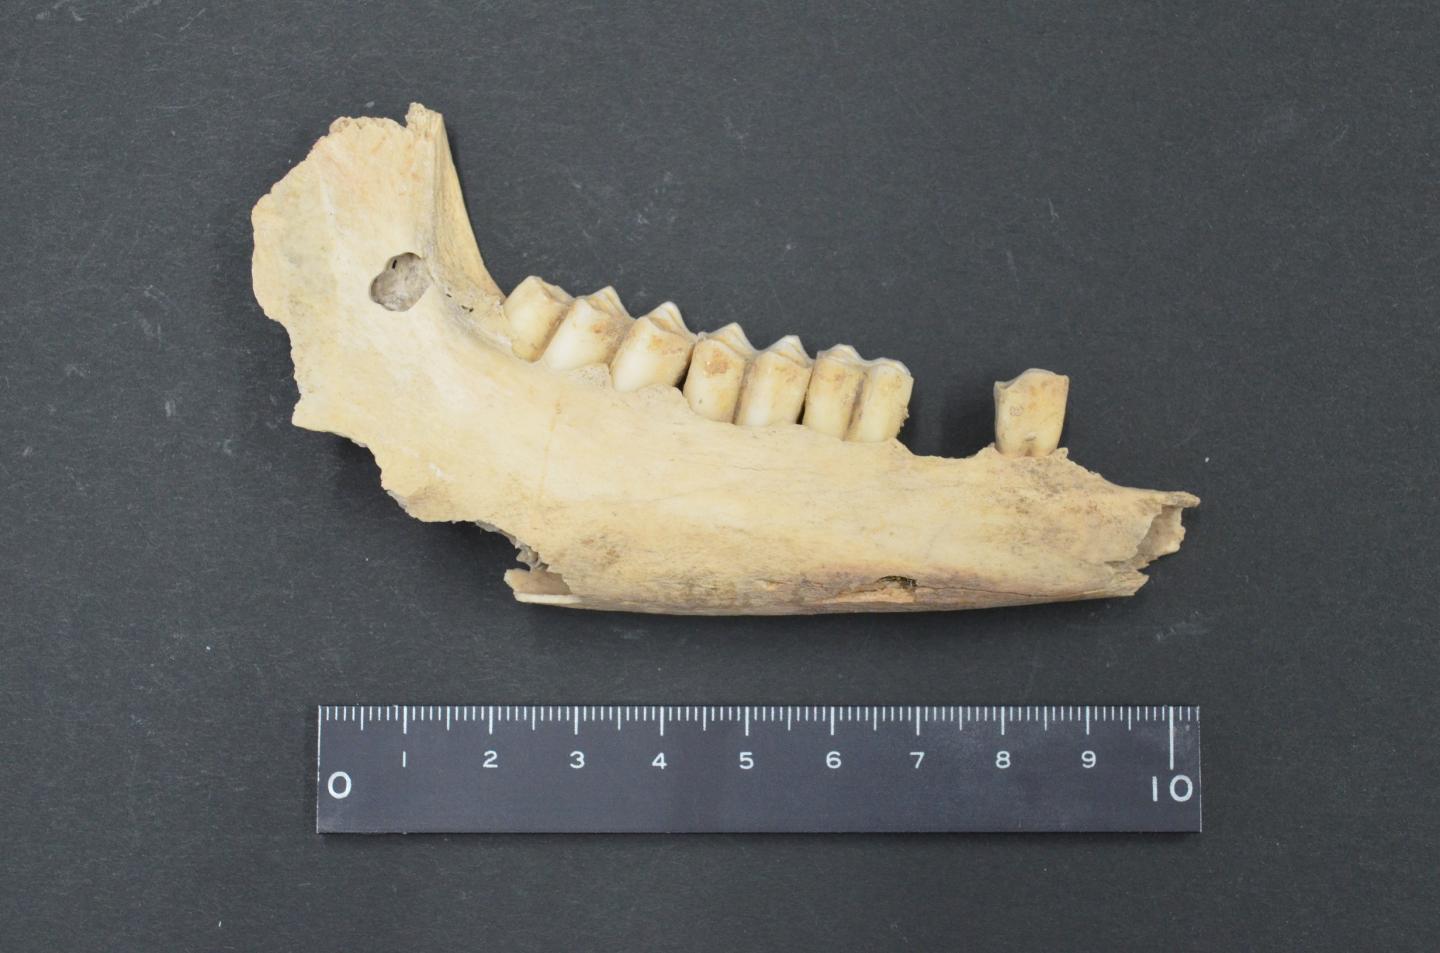 Ancient Goat Bone Used for DNA Analyses (from G&ouml;ytepe)